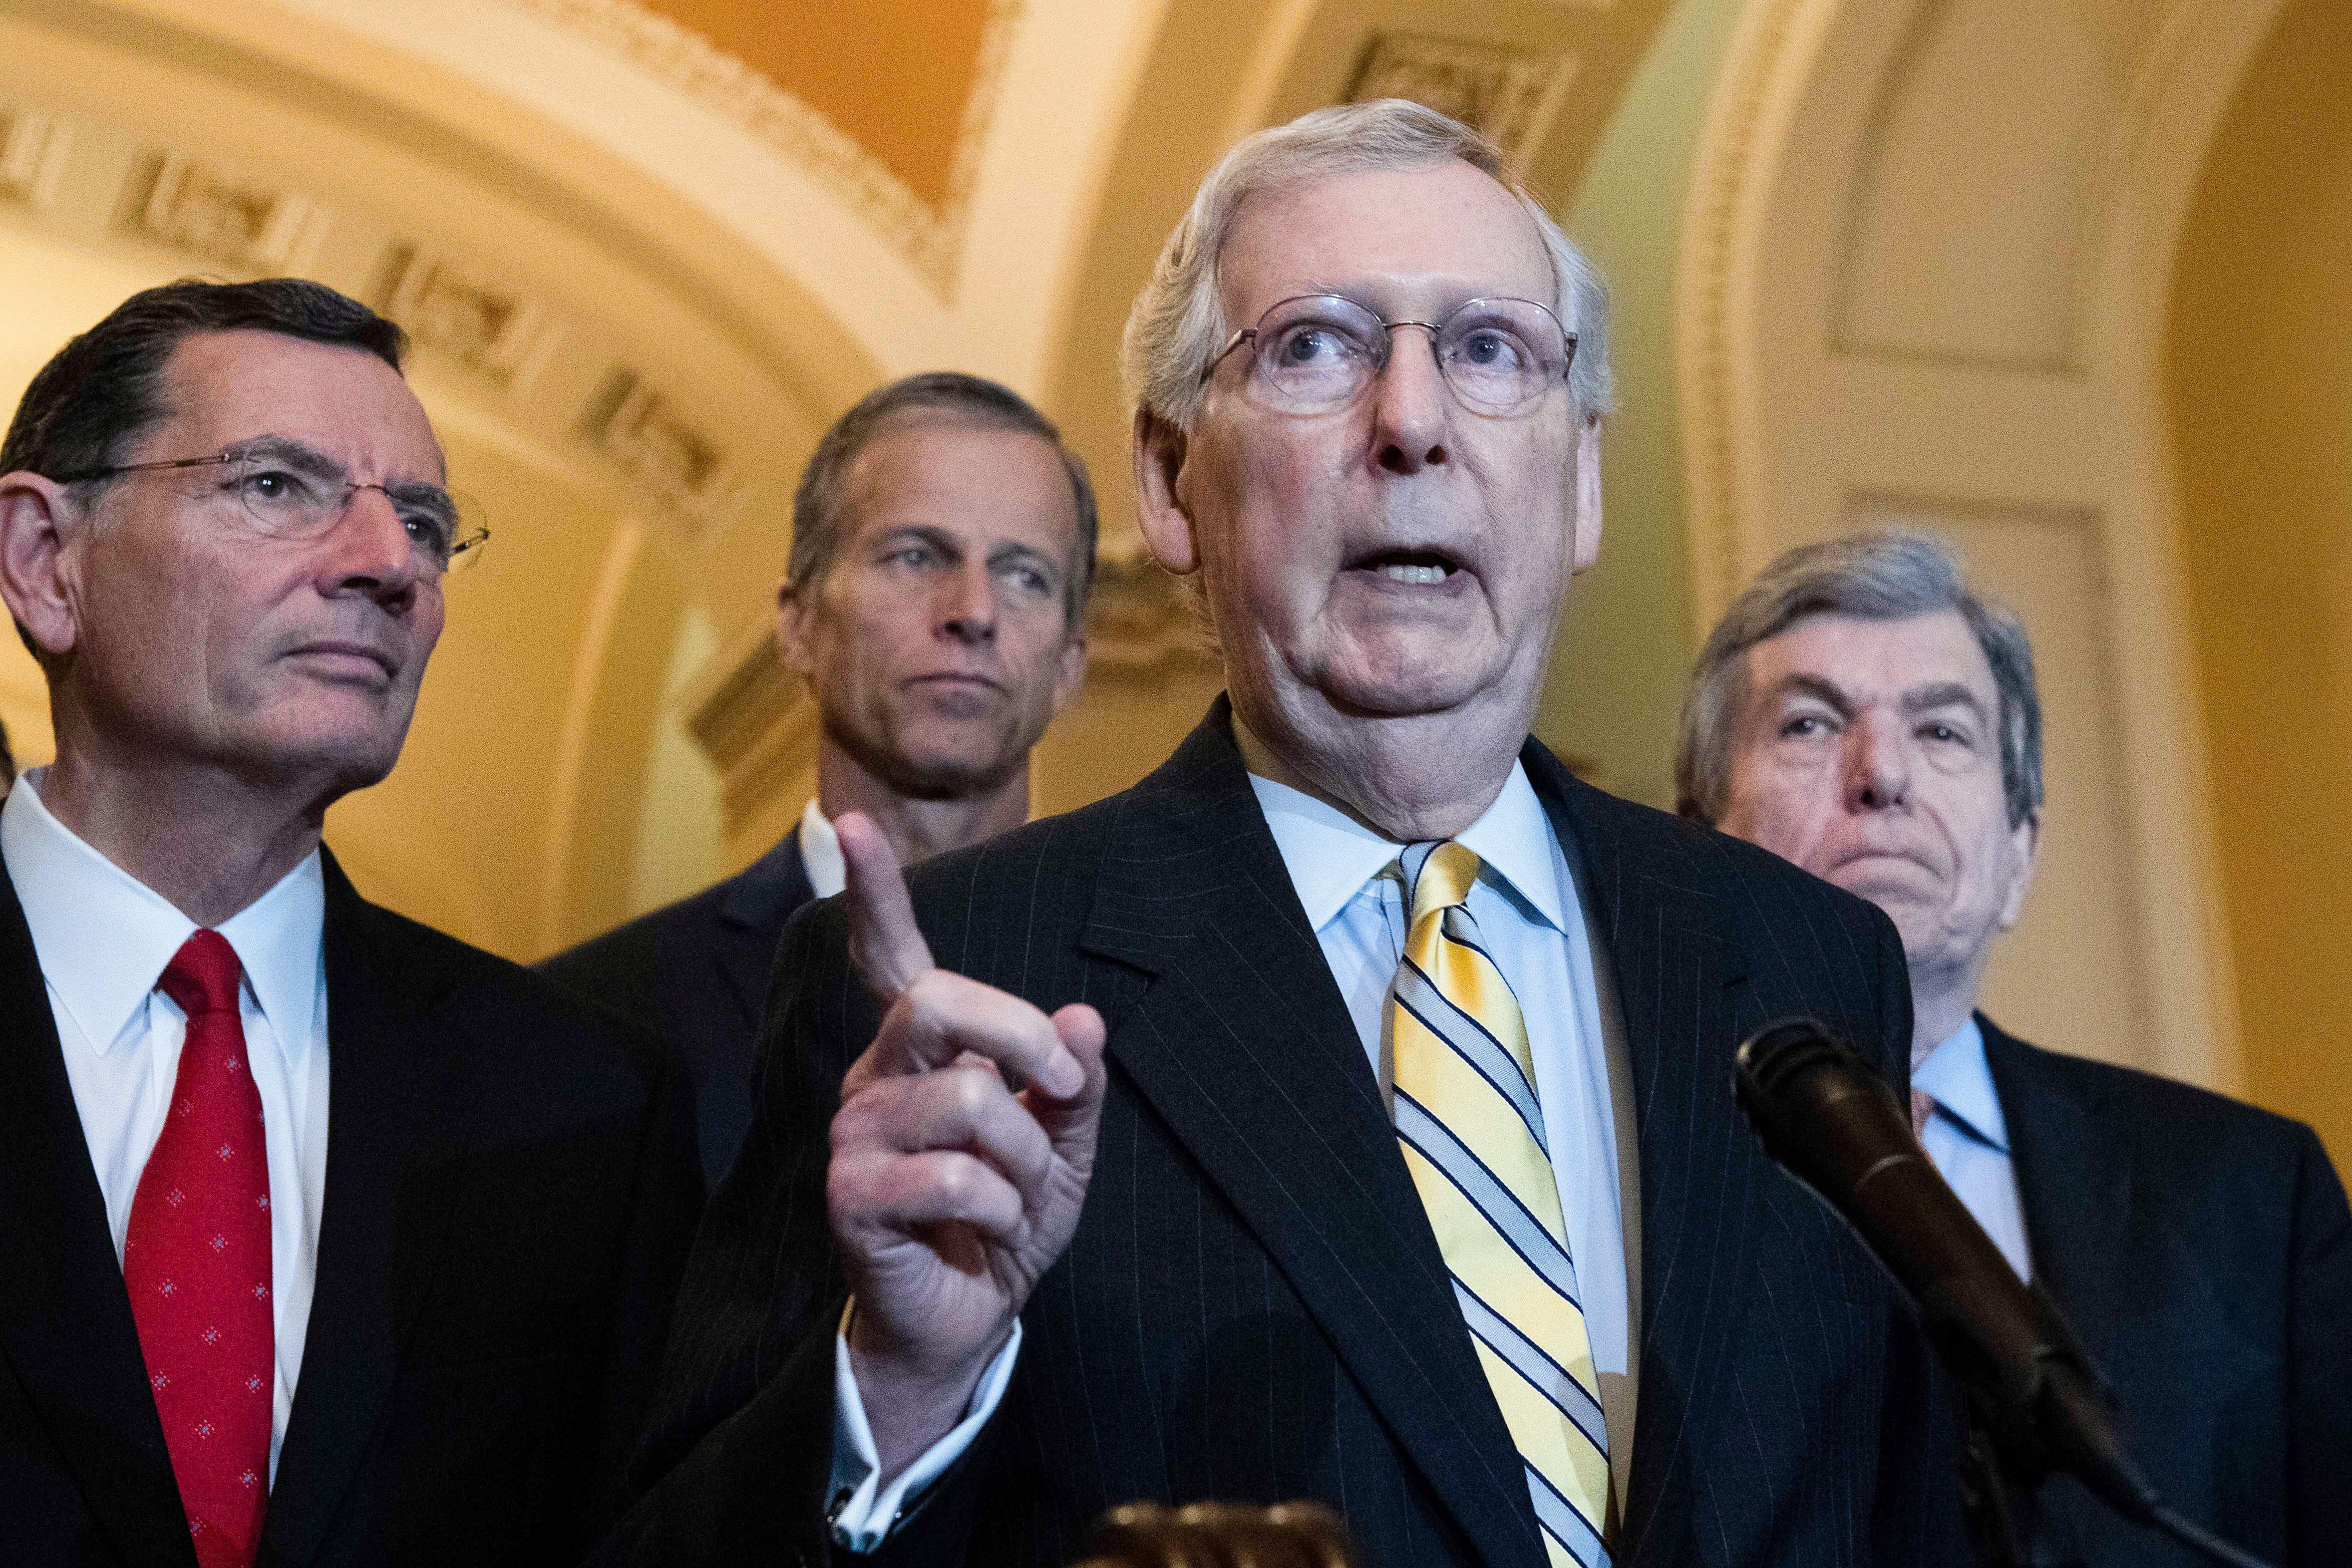 Senate Majority Leader Mitch McConnell, flanked by Republican Senators speaks to the press at the Capitol in Washington, DC, on May 14, 2019.